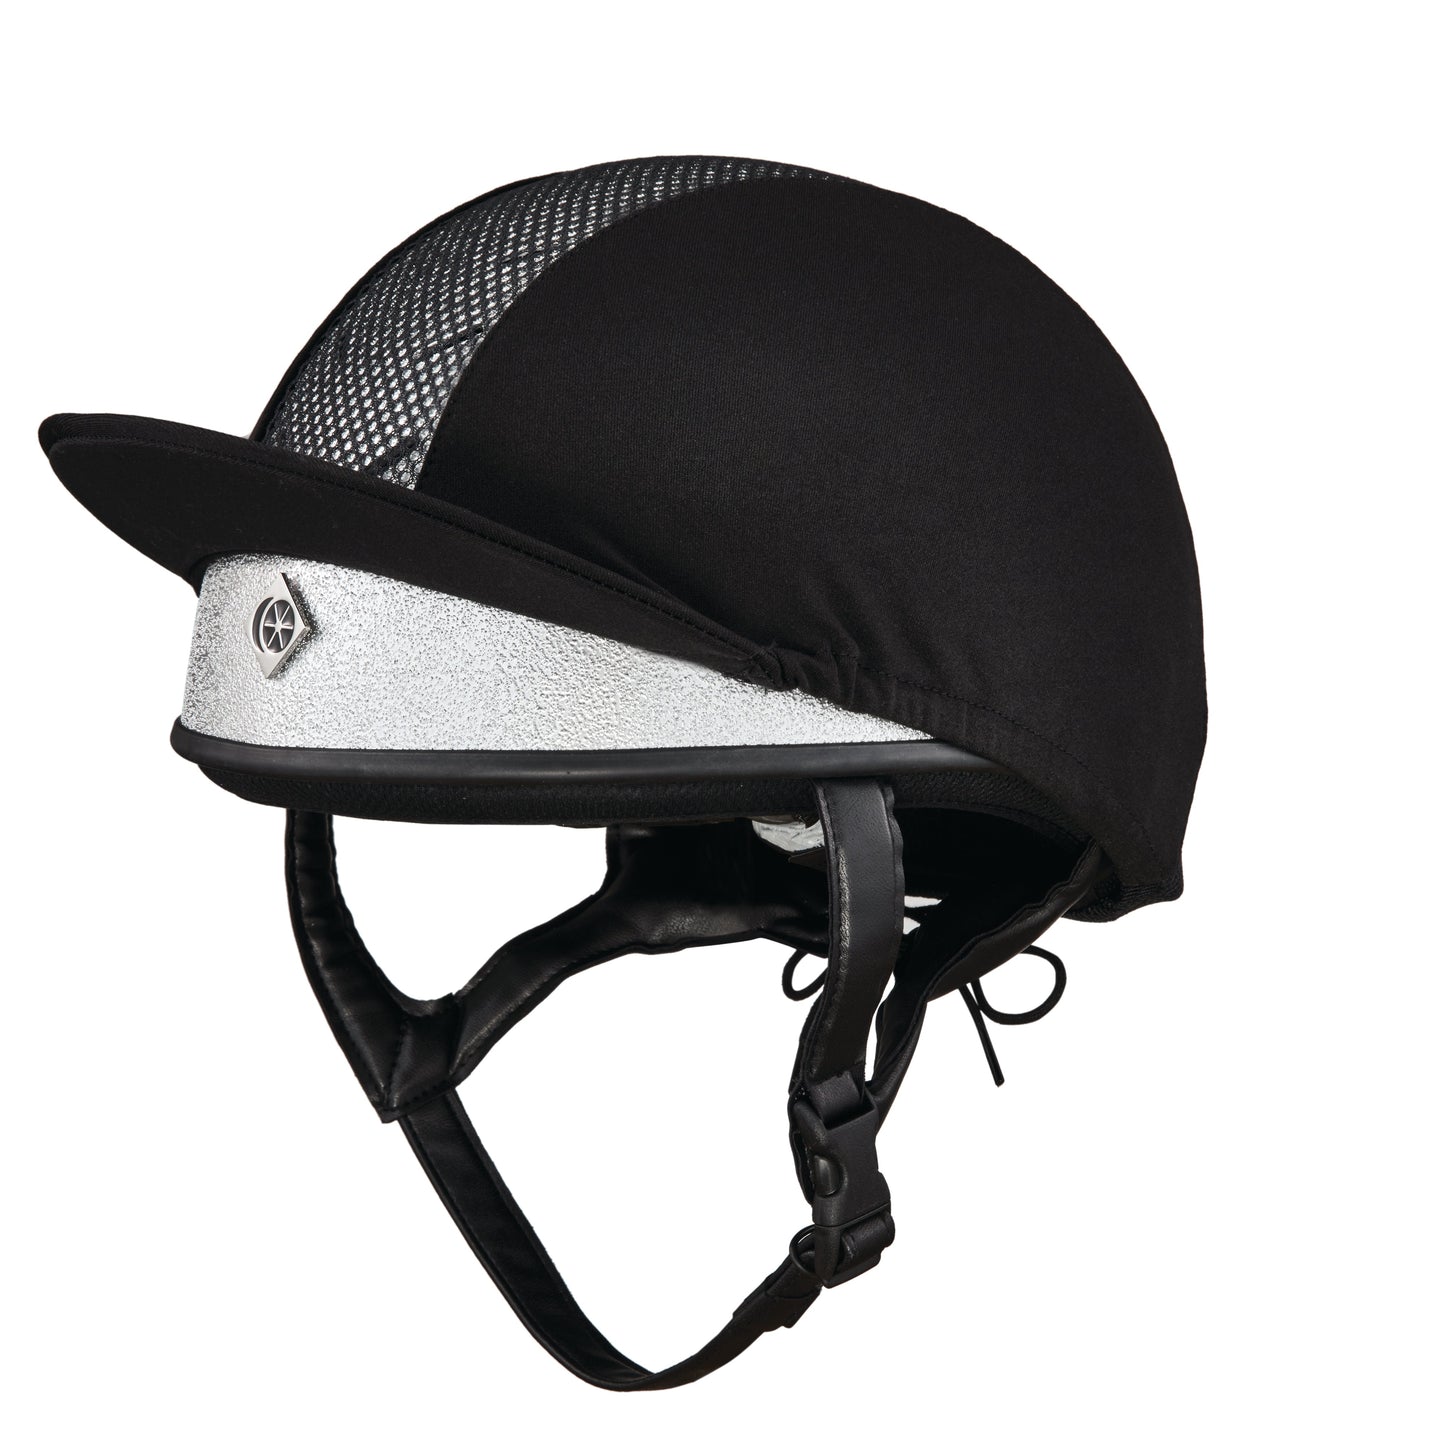 Black and silver KEP equestrian riding helmet with mesh detail.